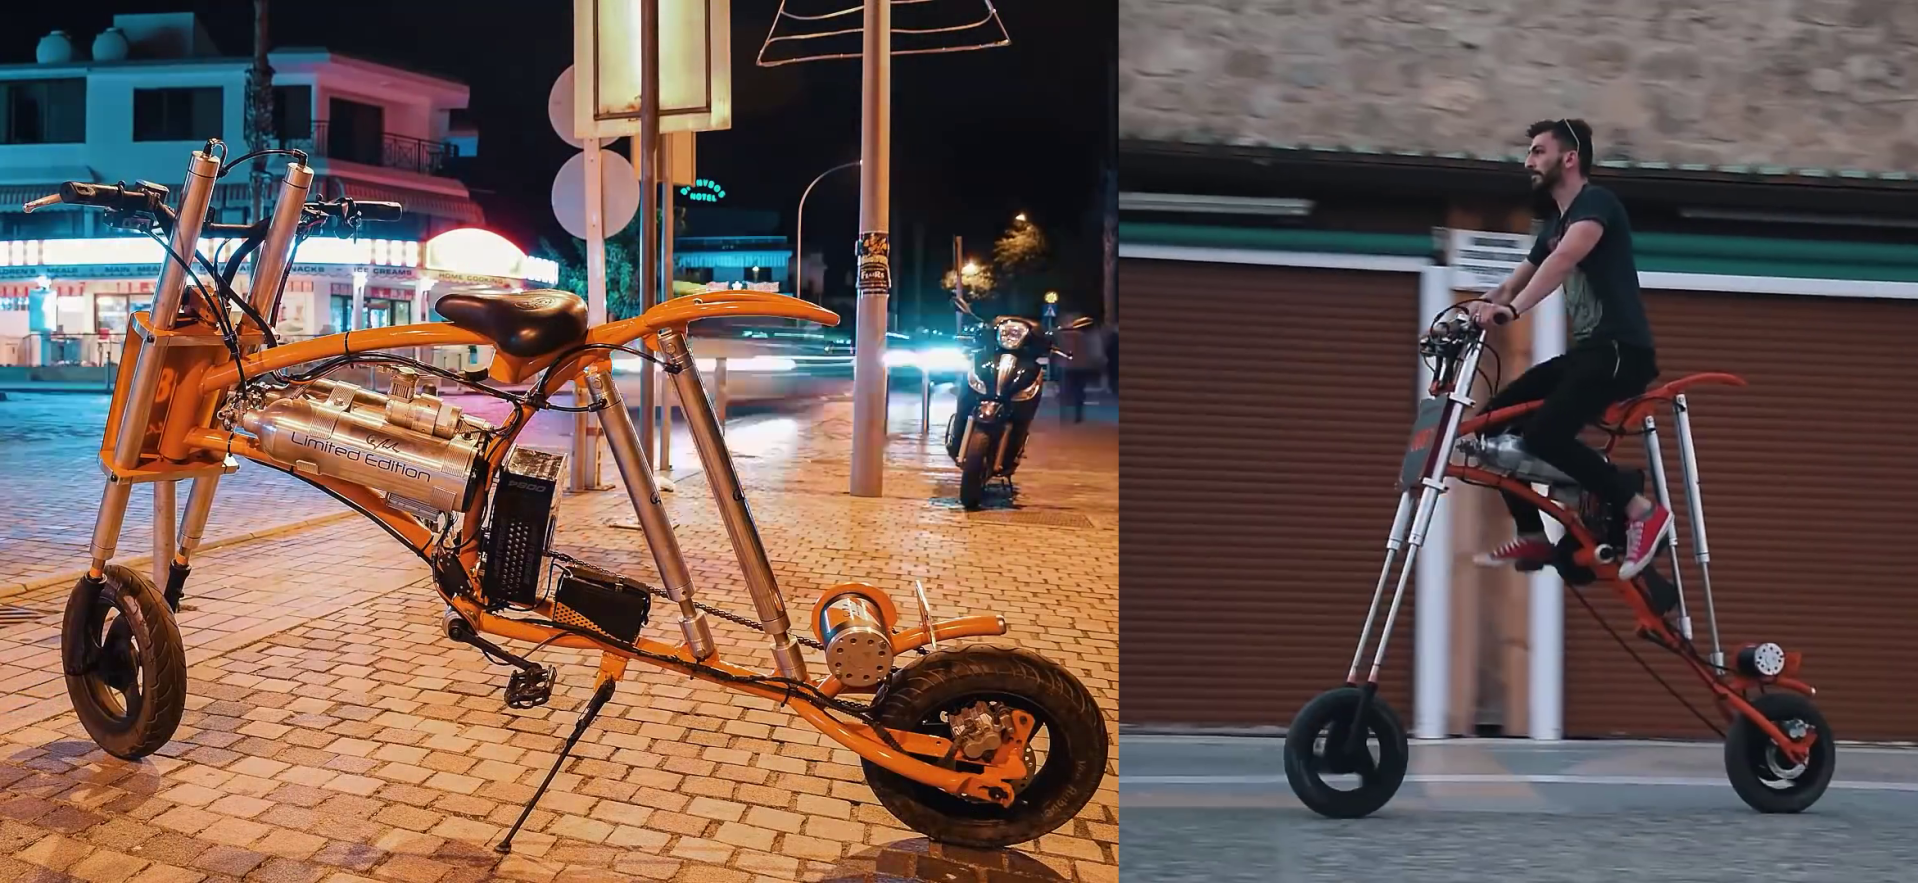 Extending Bicycle Will Let You Stand Out Above The Crowd